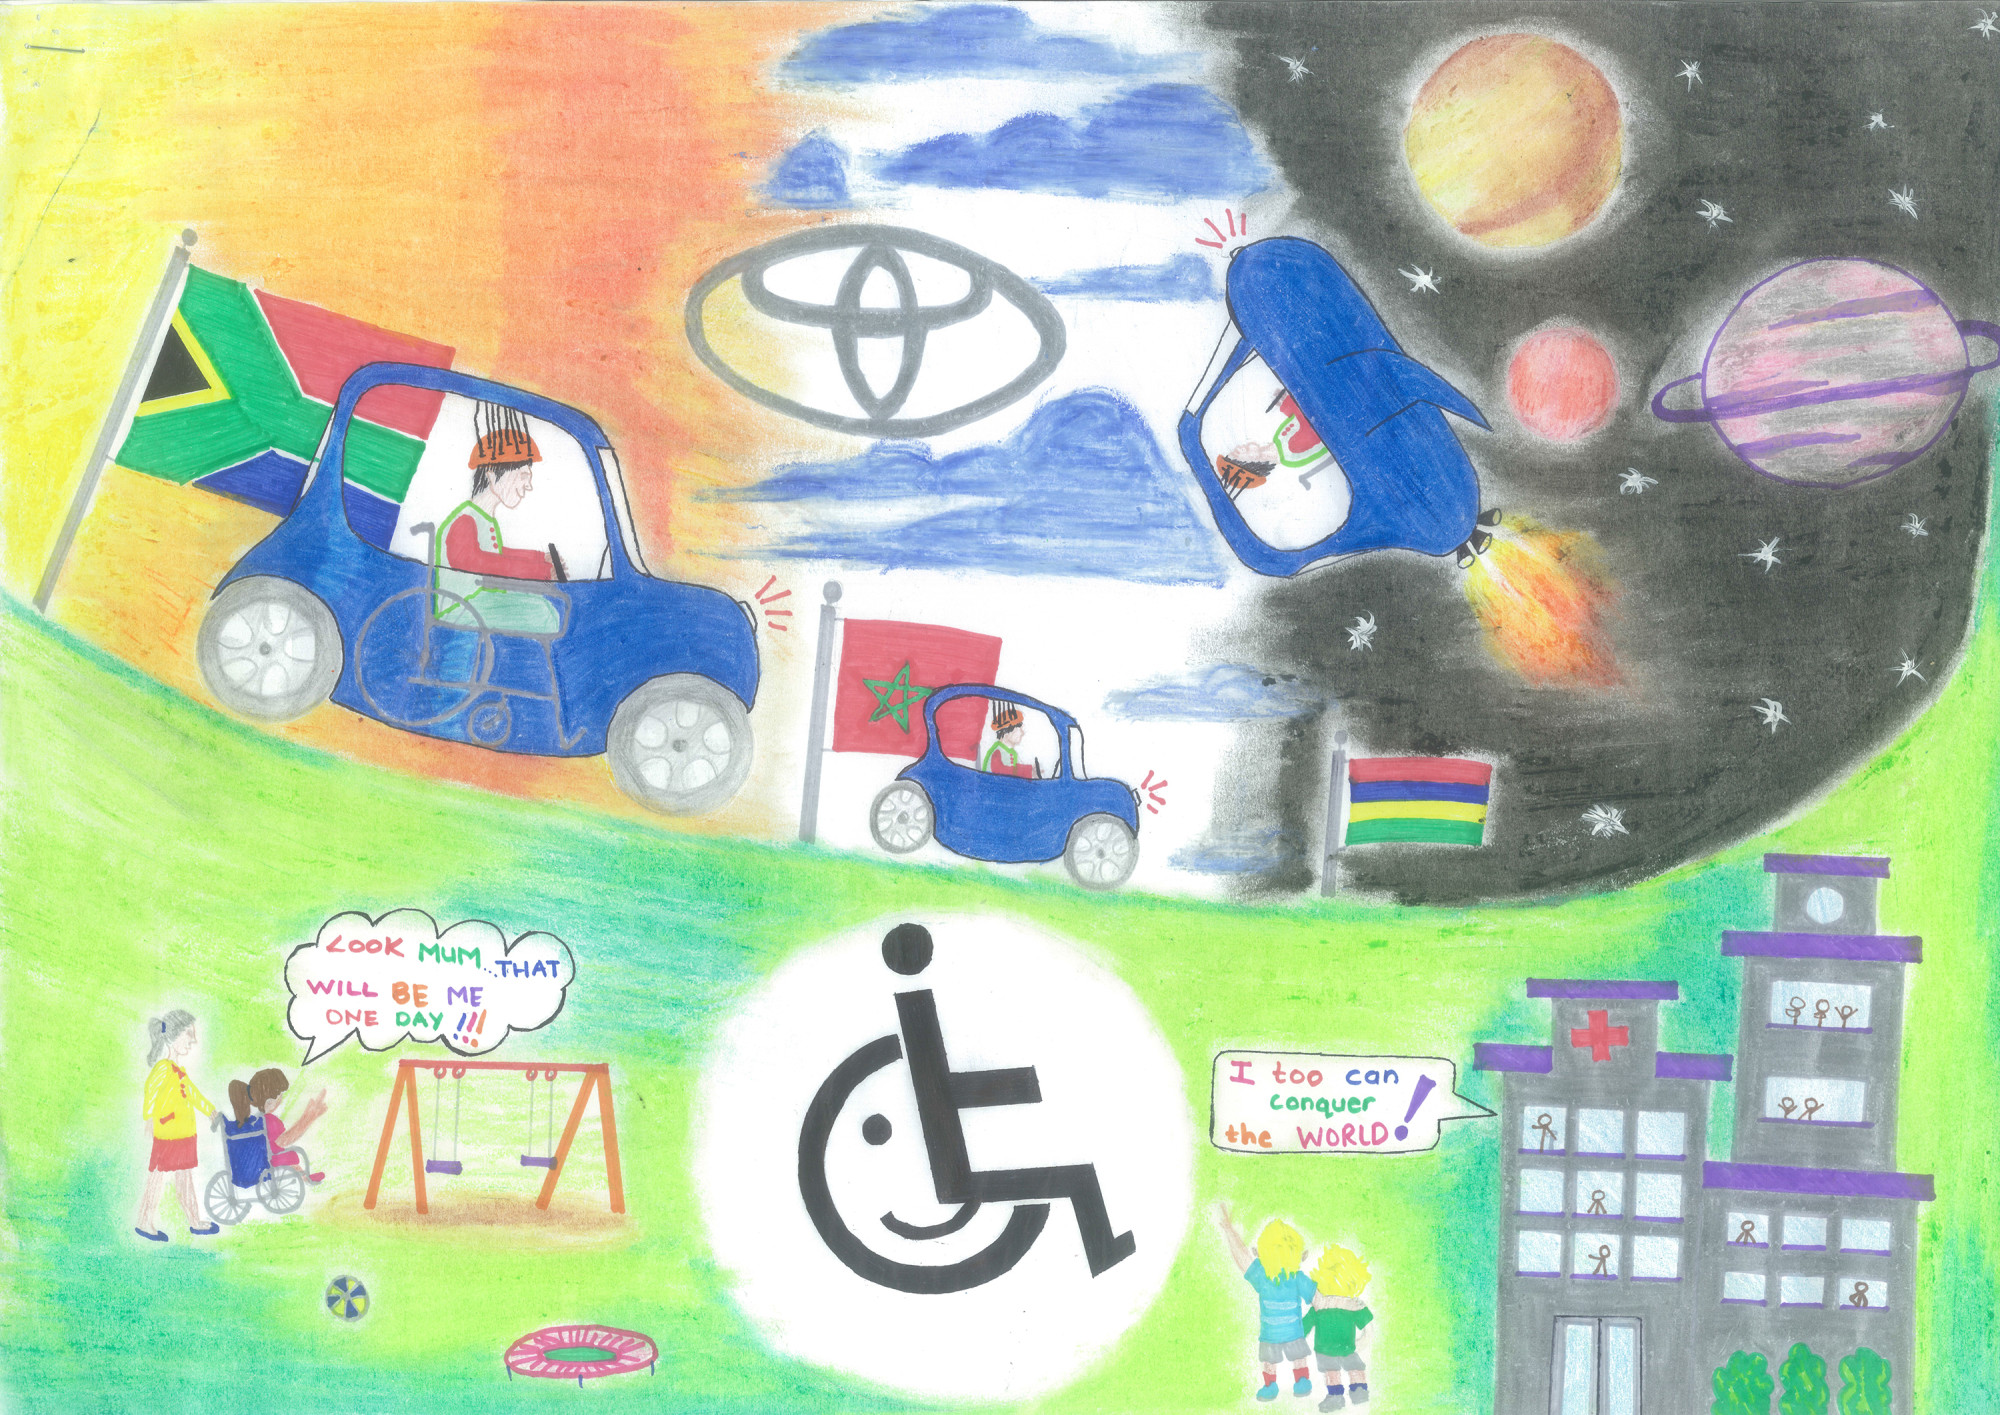 Entries for Toyota Dream Car Art Contest now open